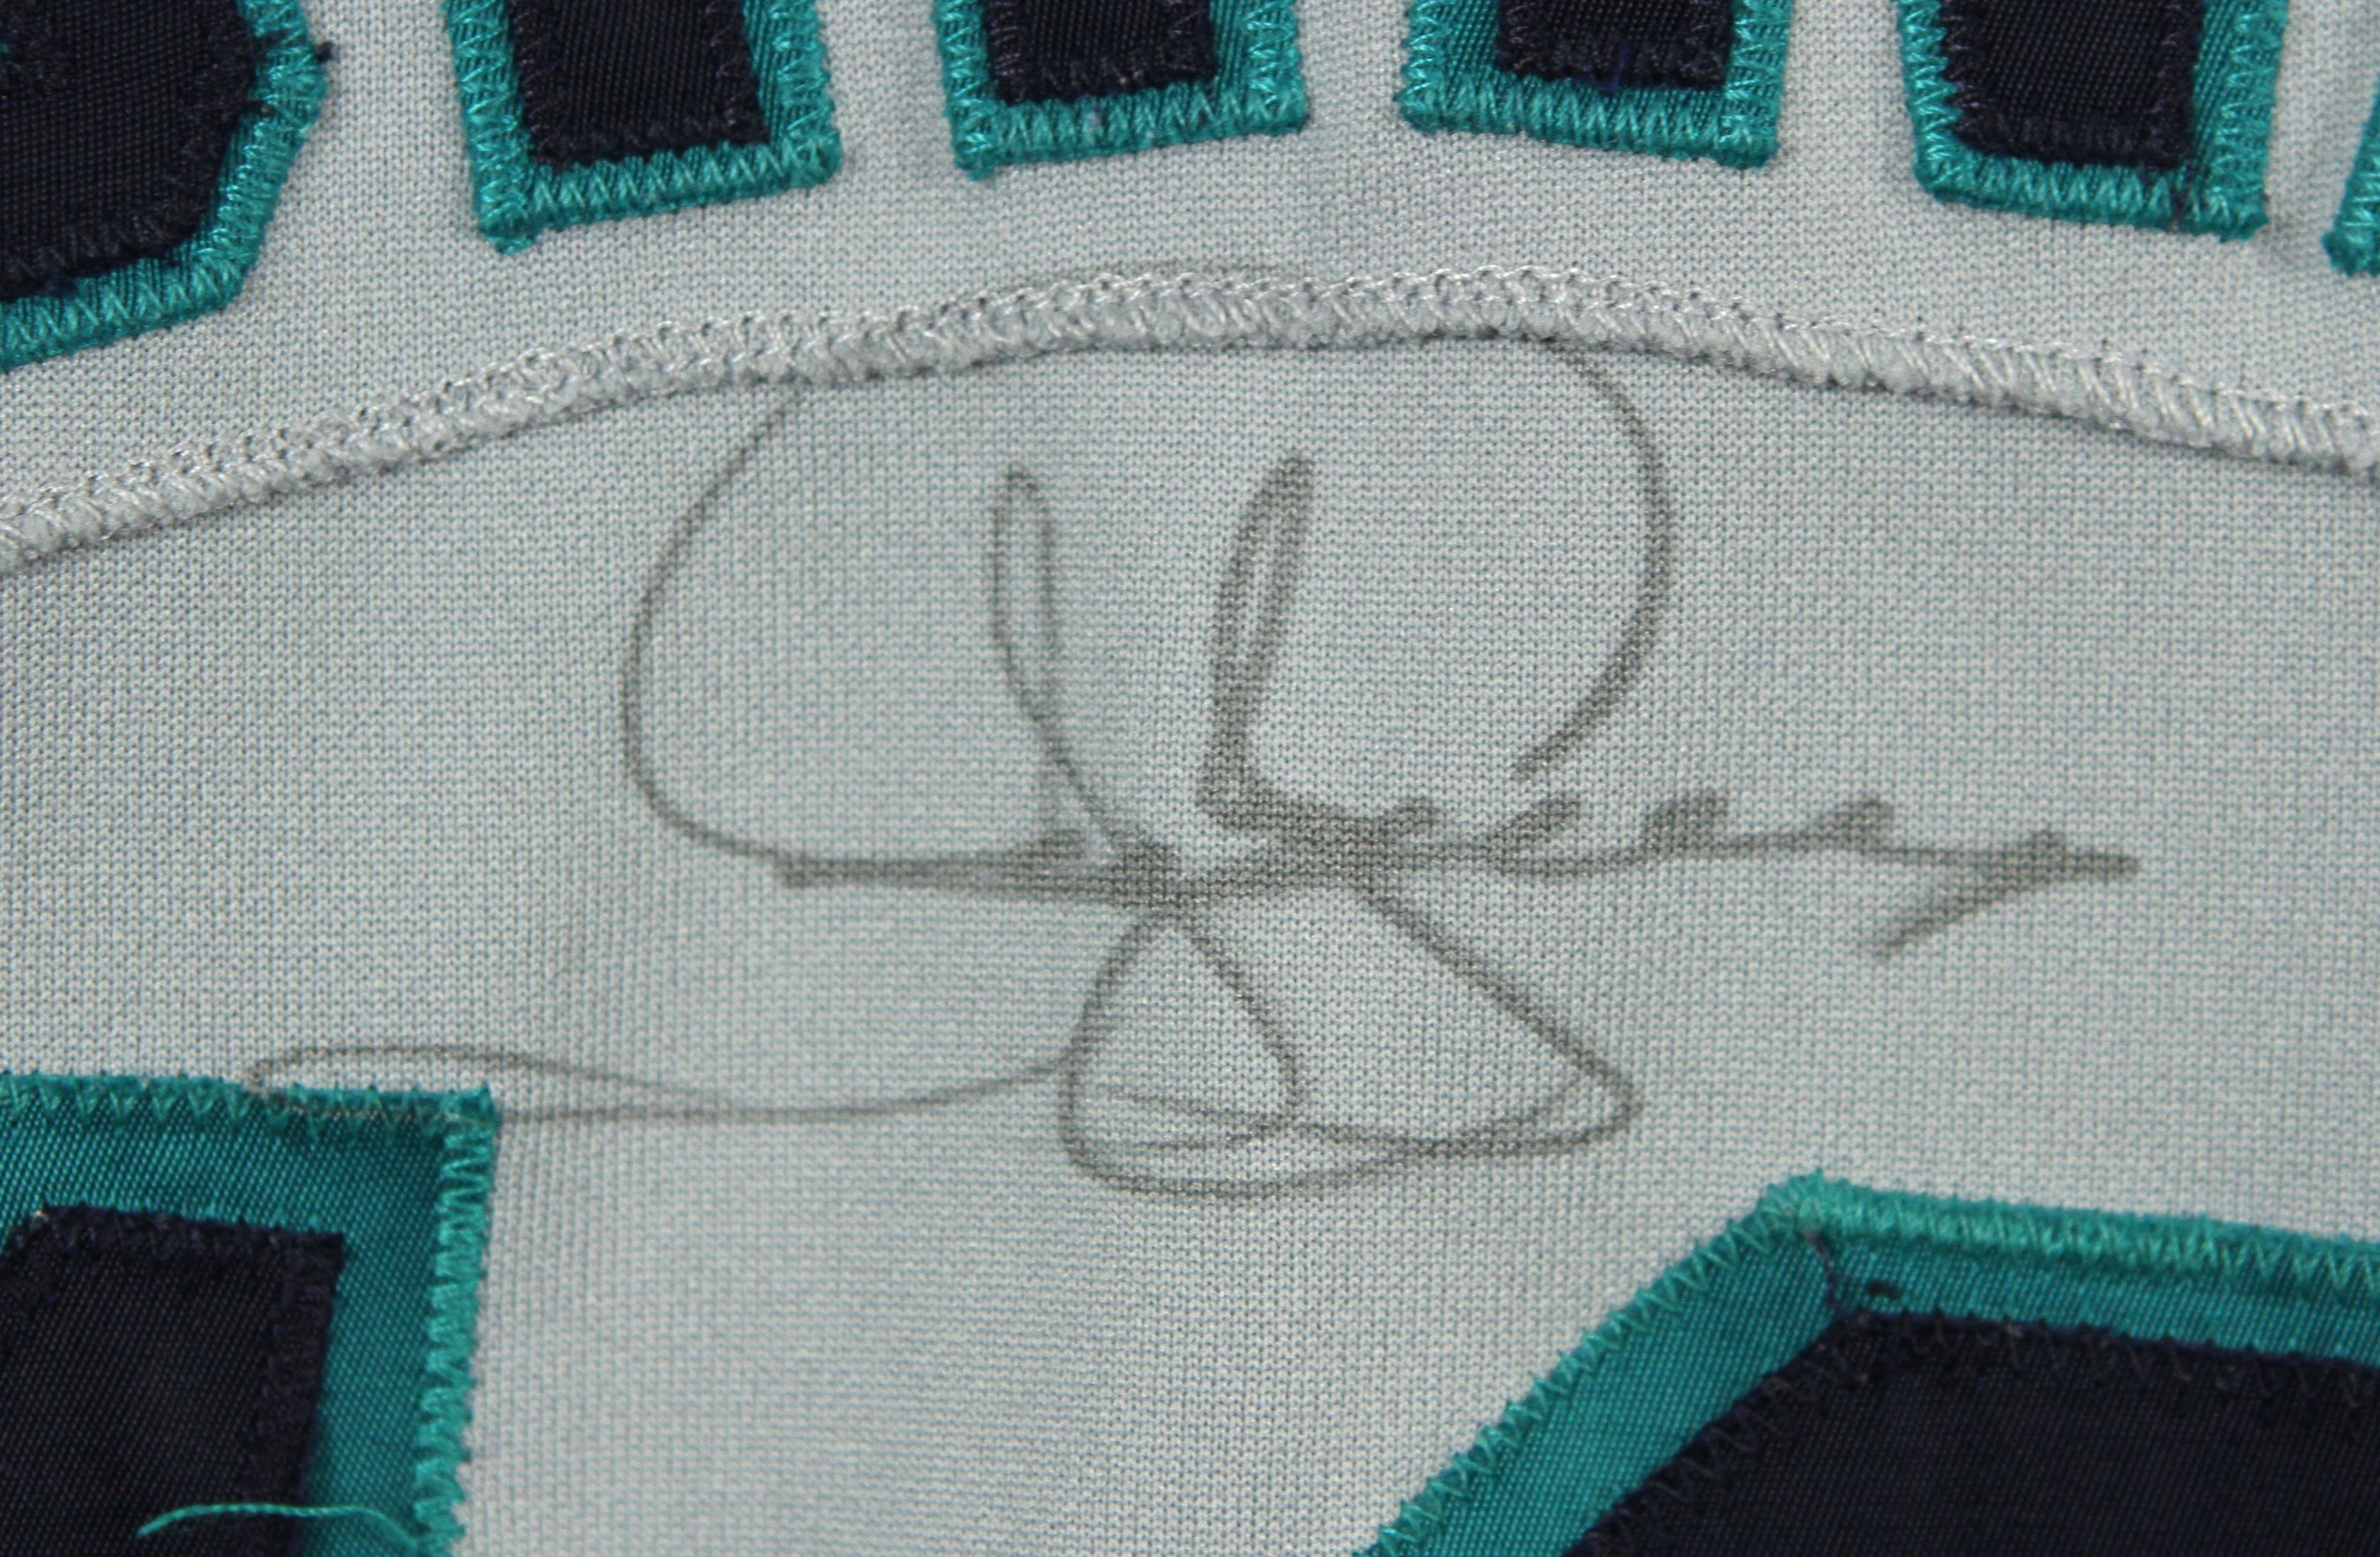 1996 Jay Buhner Game Worn & Signed Seattle Mariners Jersey., Lot #51192